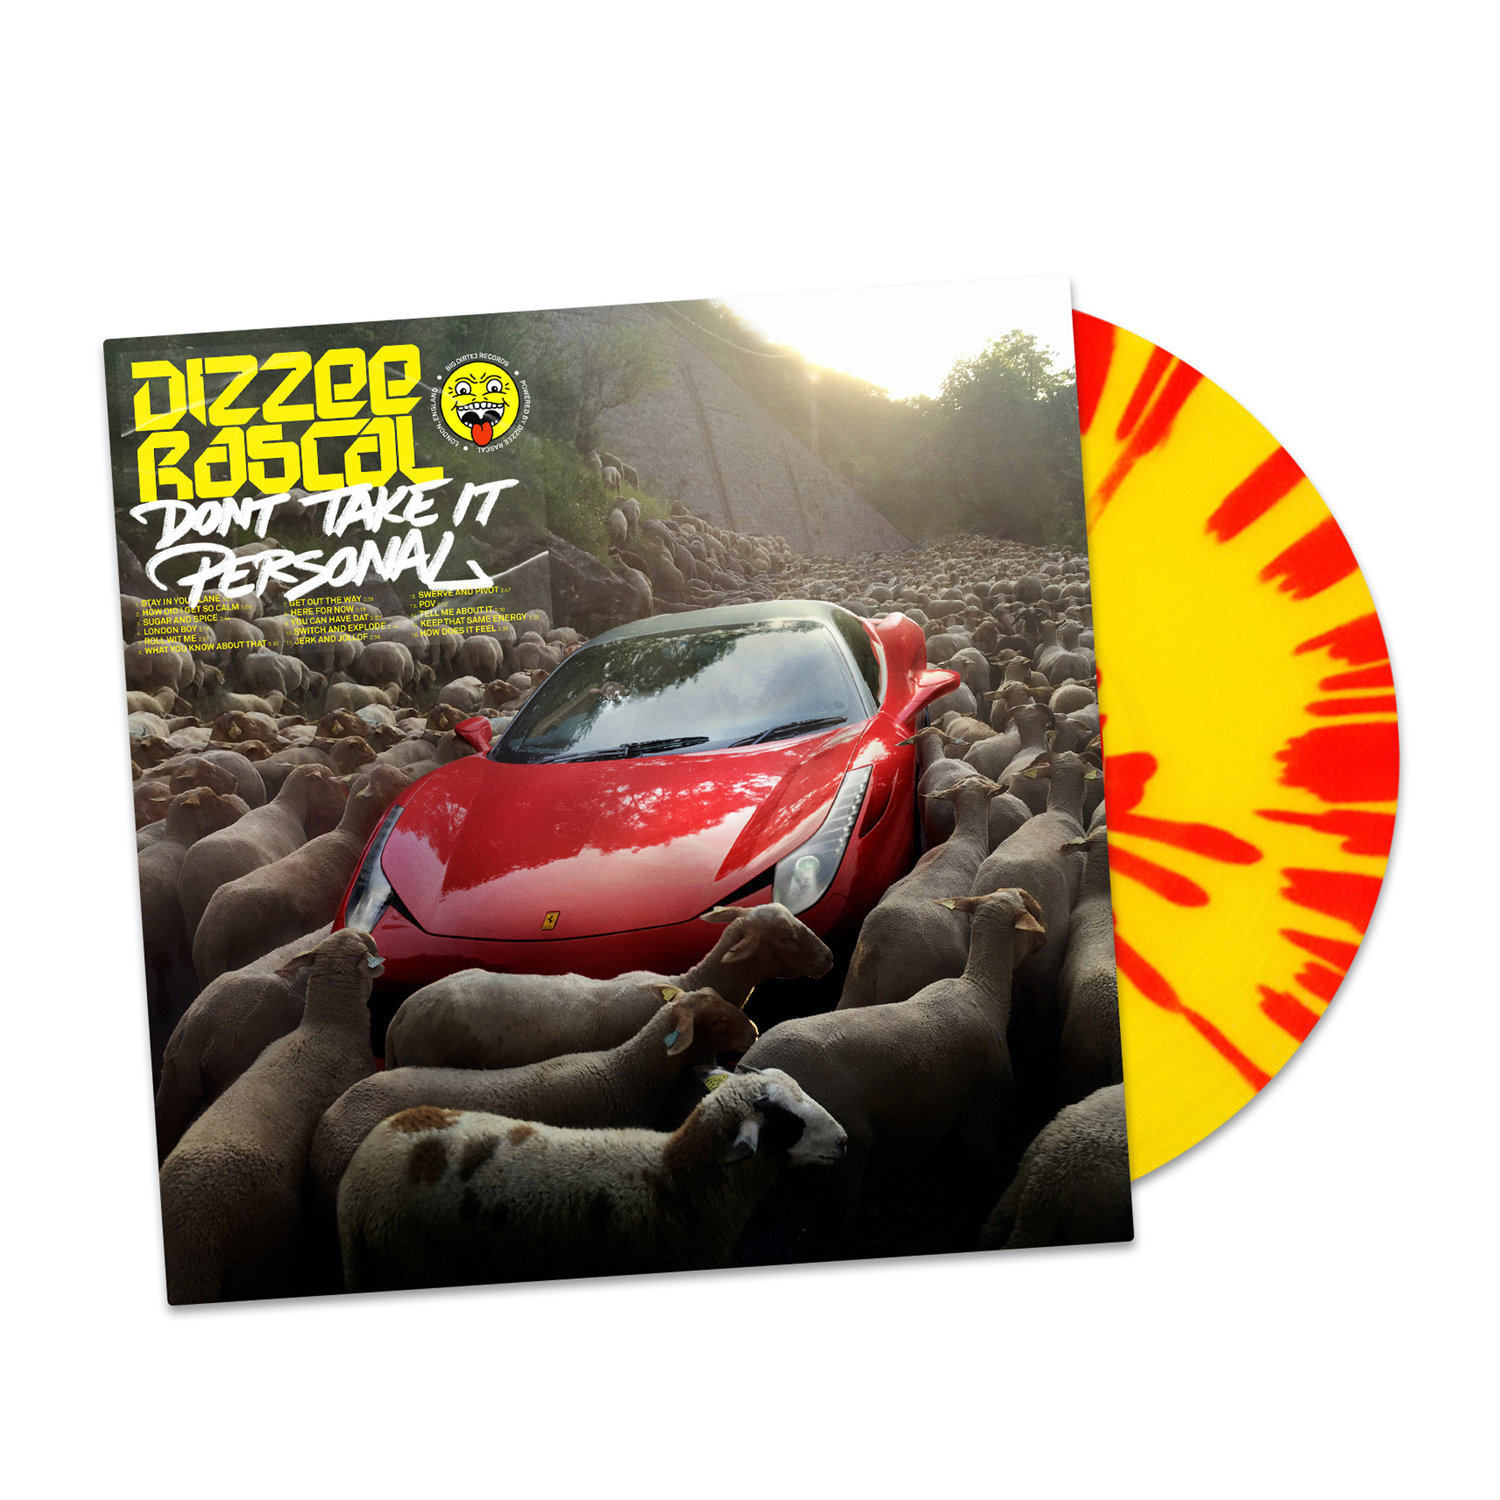 Don't Take It Personal: Limited Red/Yellow Splatter Vinyl LP + Signed Print